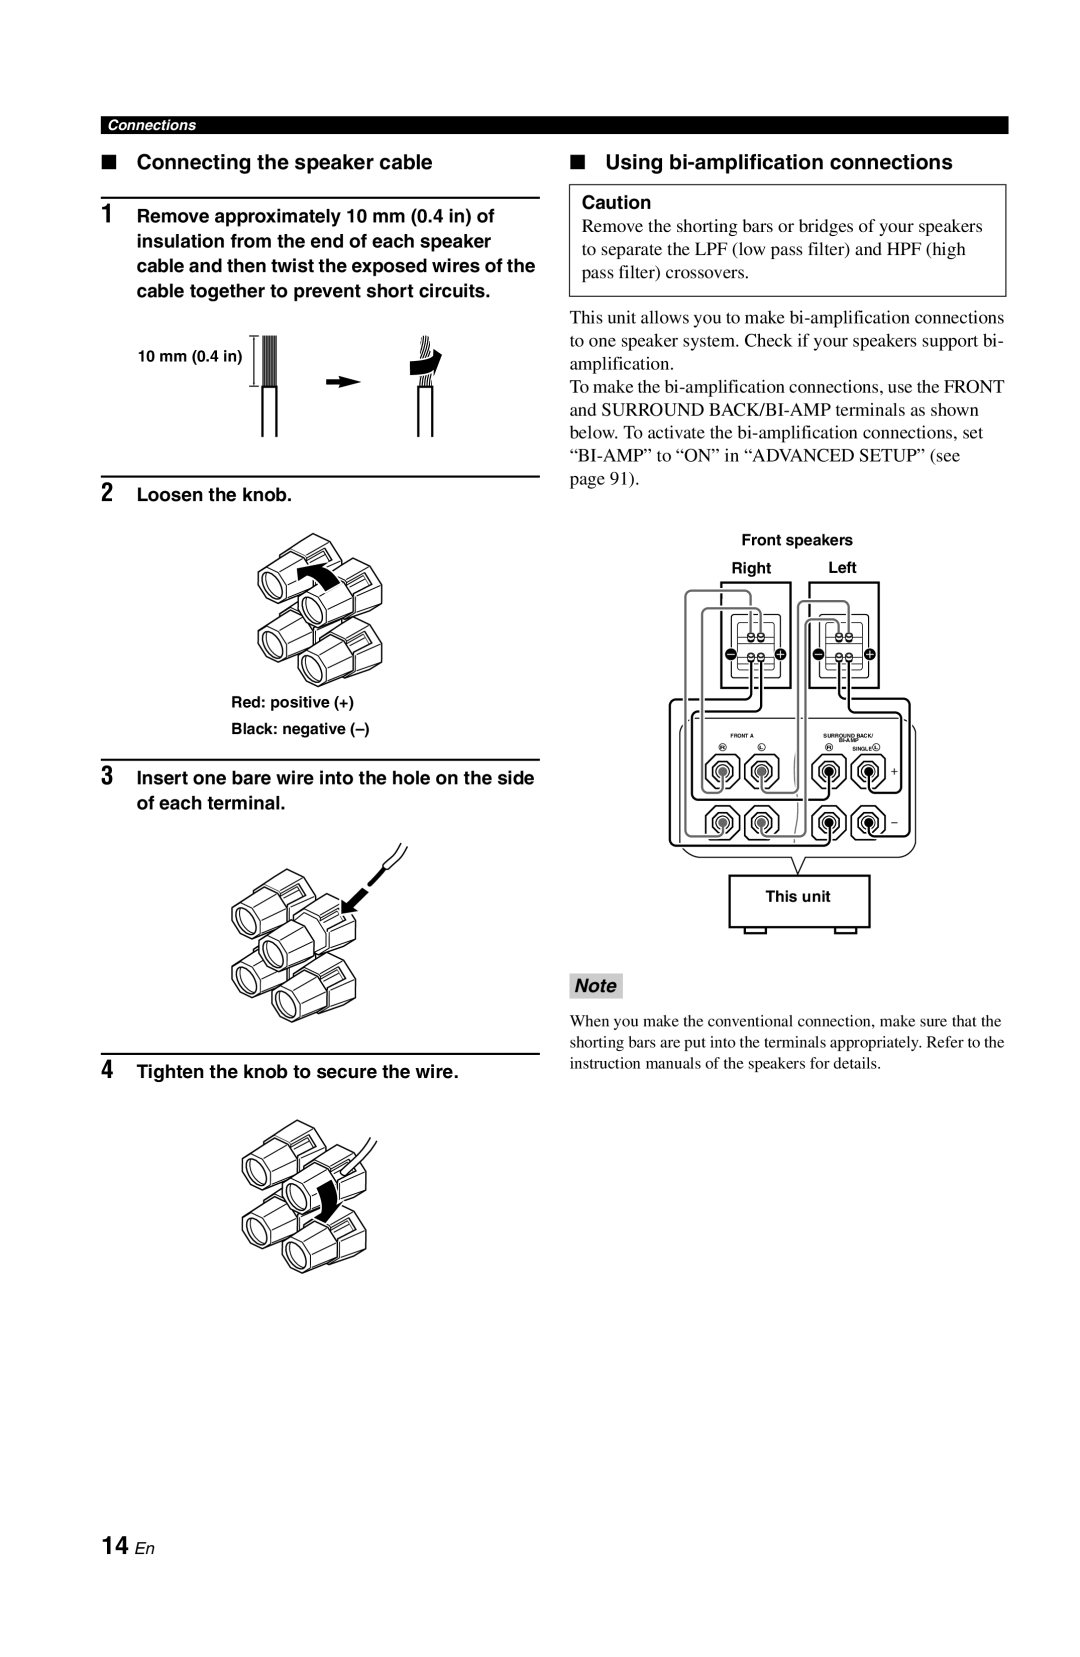 Yamaha DSP-AX861SE owner manual 14 En, Connecting the speaker cable, Using bi-amplificationconnections, 2Loosen the knob 